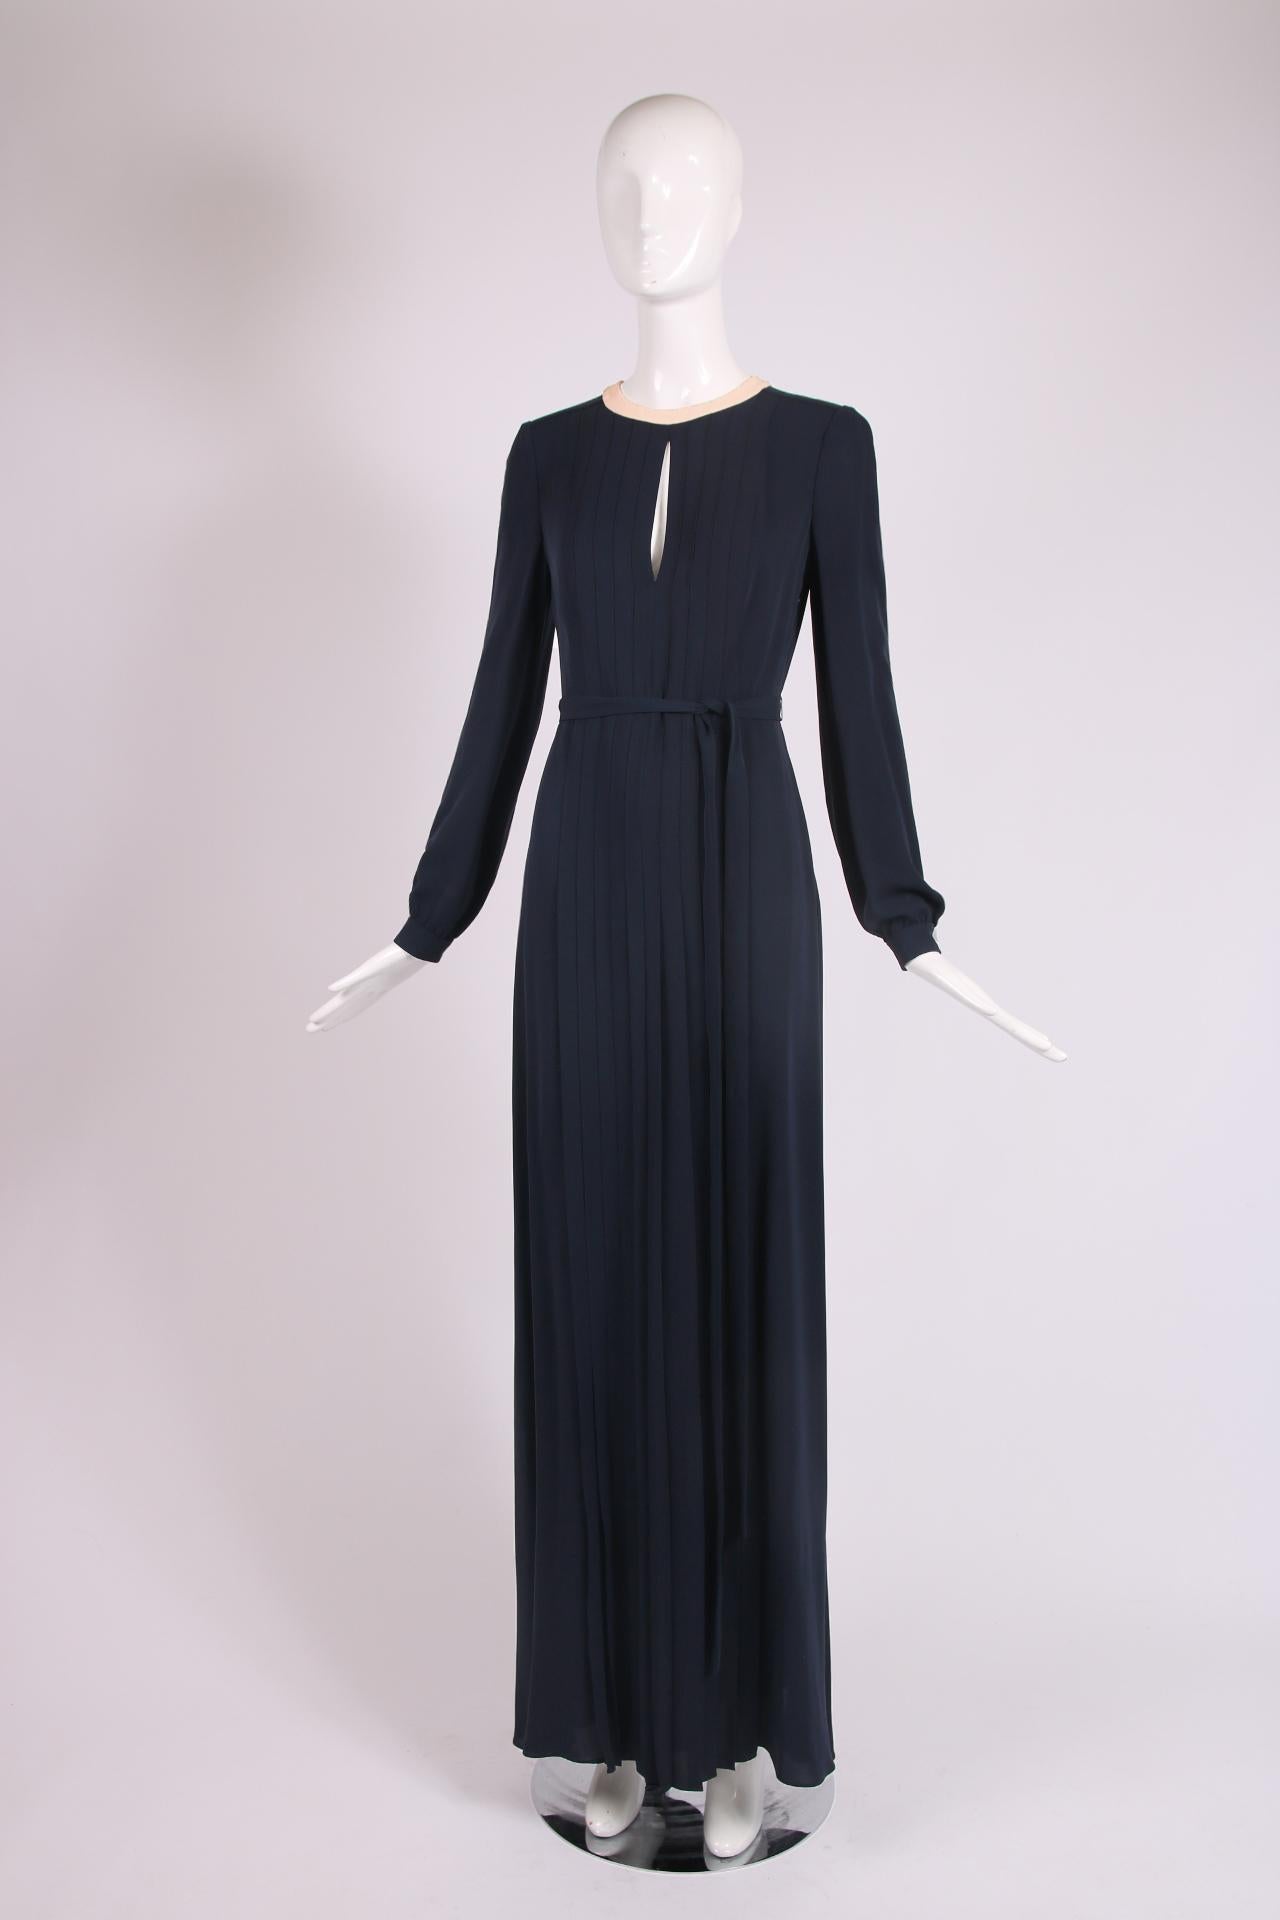 Valentino navy silk gown with blush pink trim at the neckline and with a keyhole opening, pleated skirt, self belt and open back. Size 40, 100% silk. In excellent condition. Please consult measurements.

Shoulders - 14